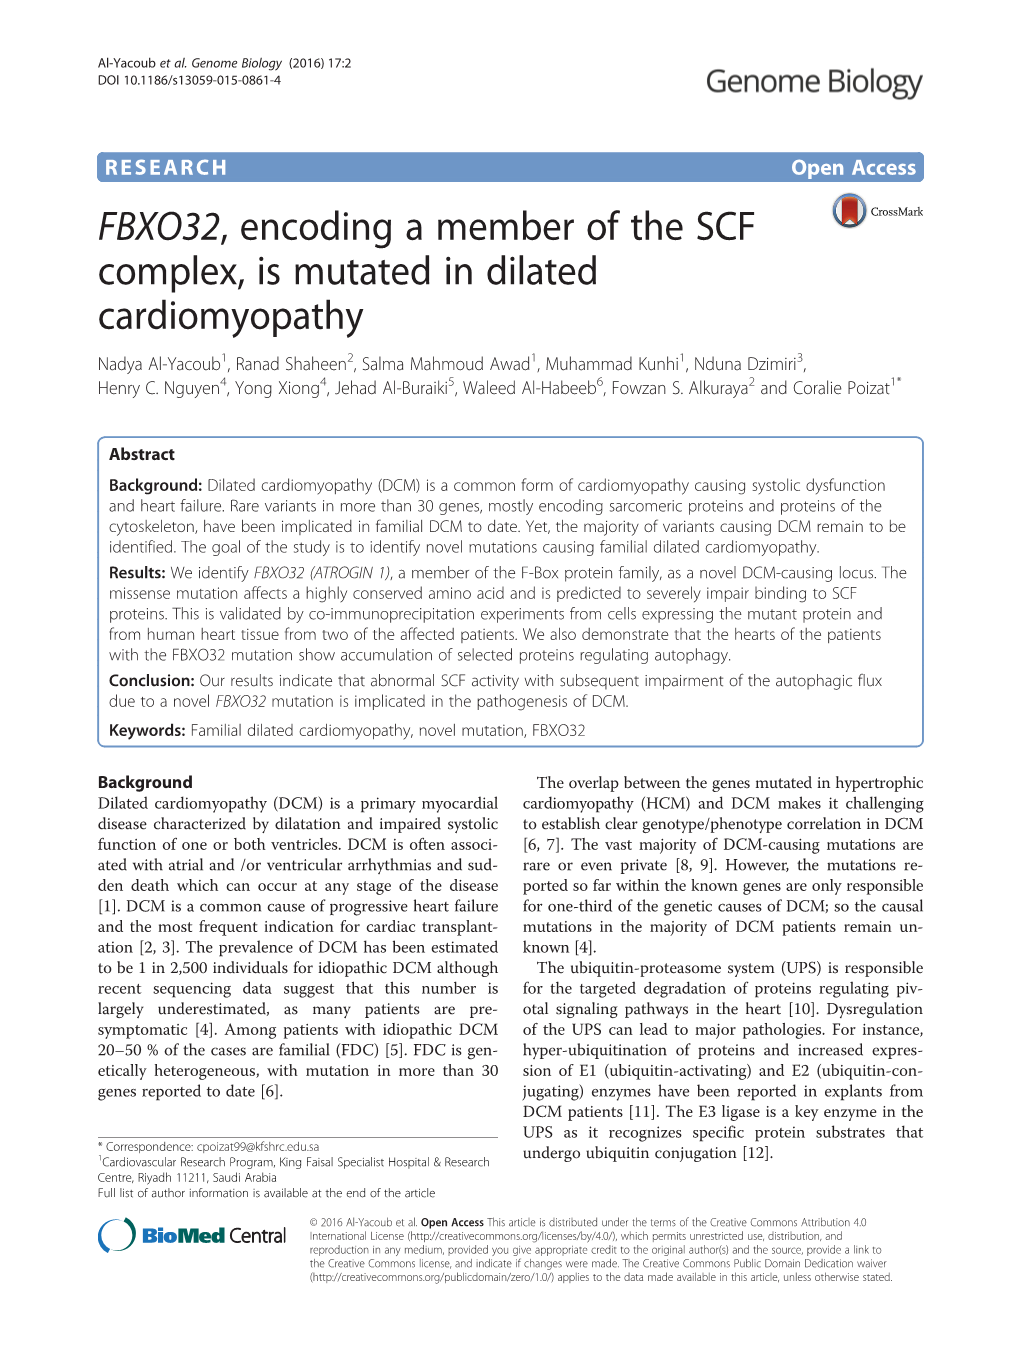 FBXO32, Encoding a Member of the SCF Complex, Is Mutated in Dilated